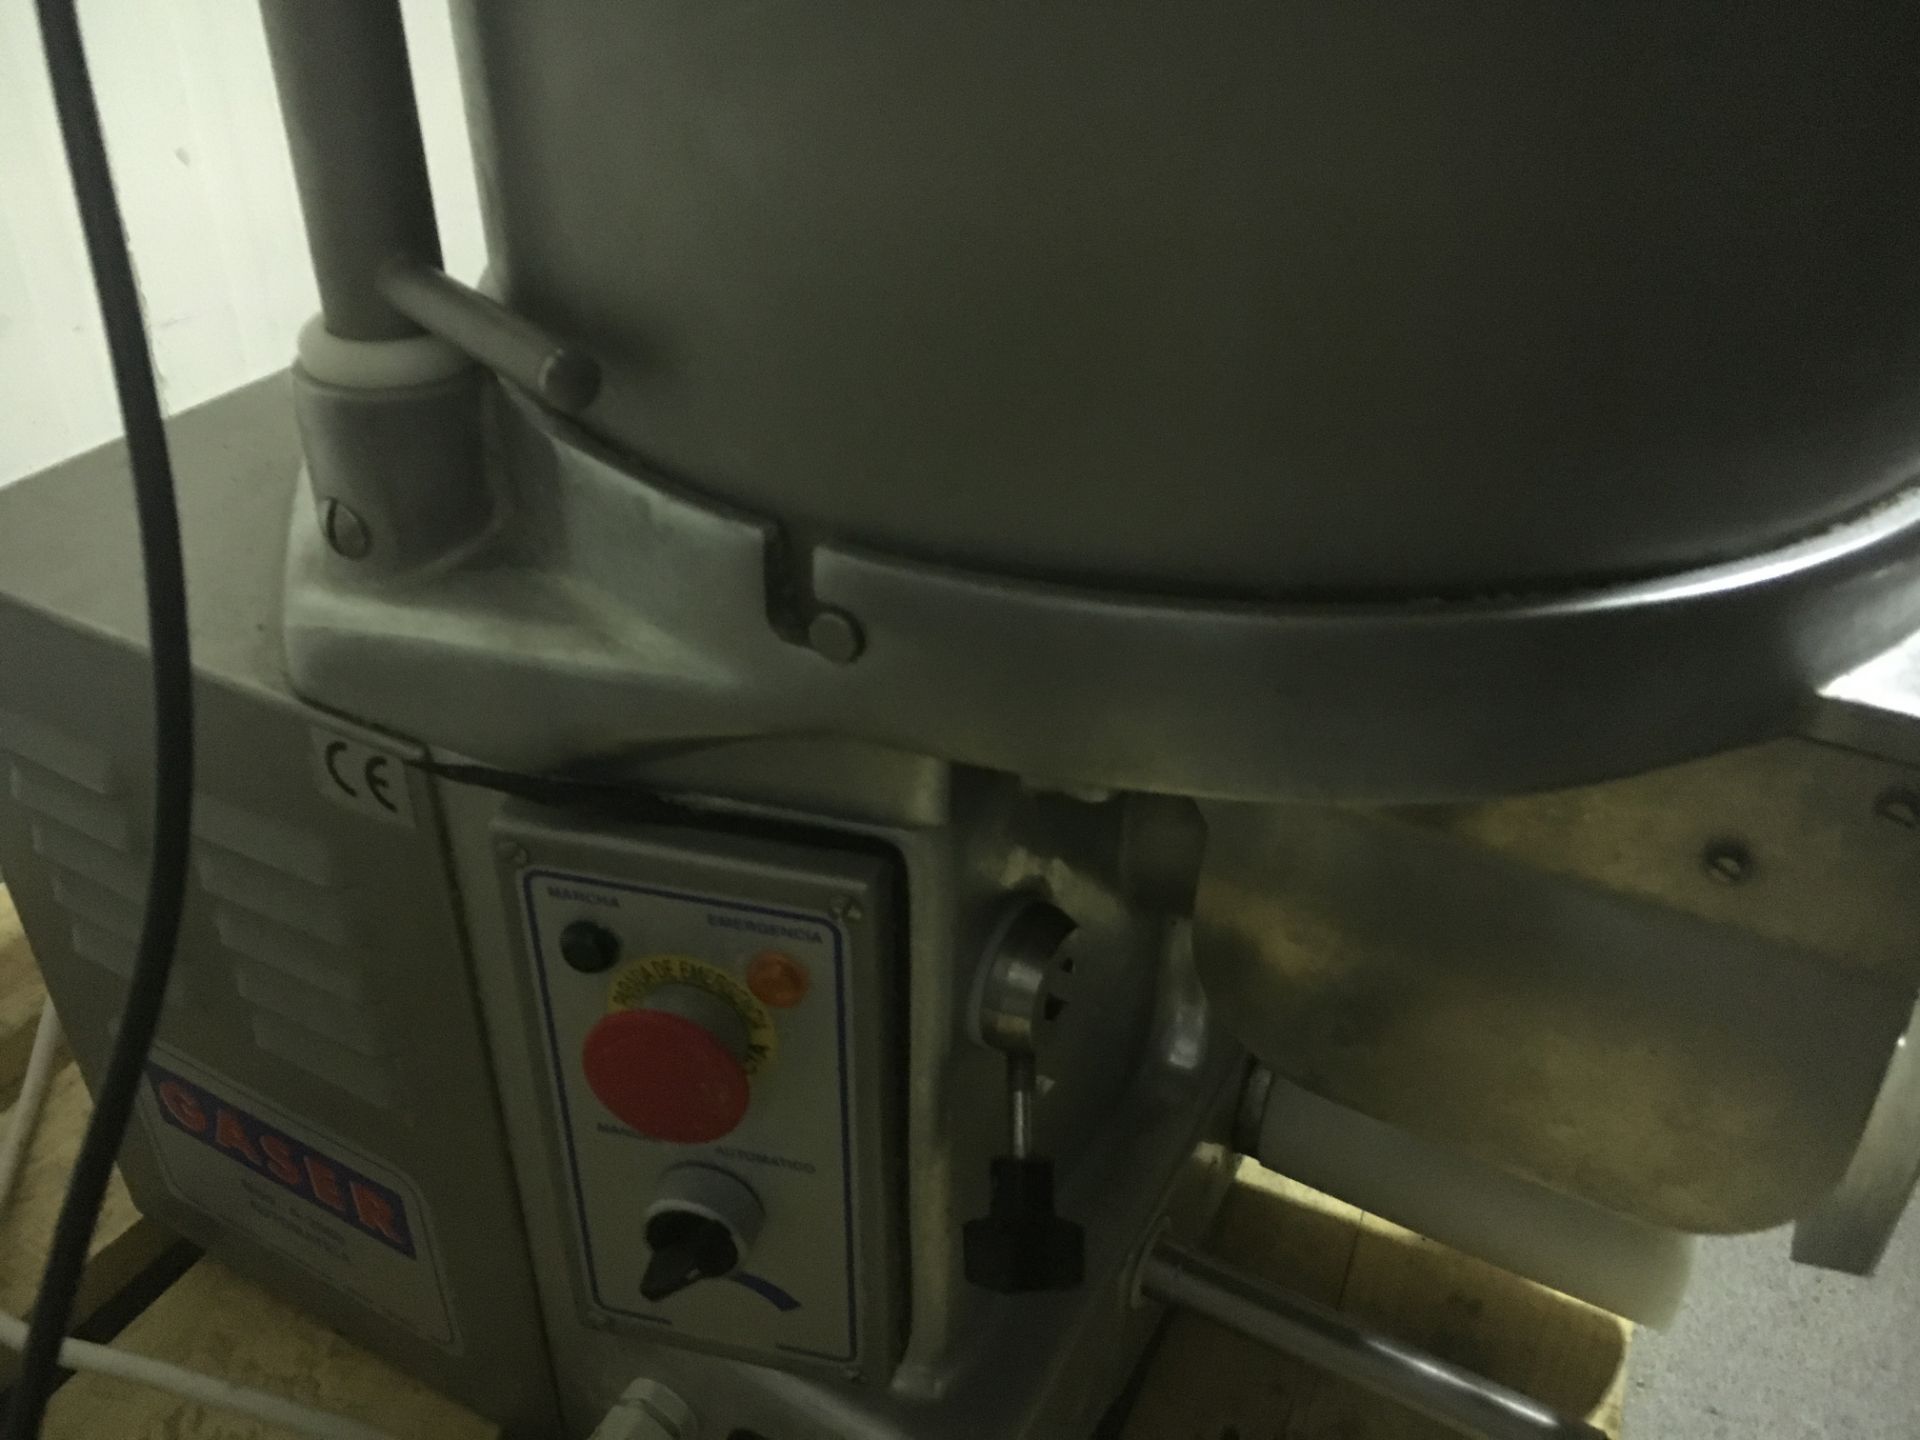 Gaser Burger Forming machine. Complete with foot switch. Totally S/s - Image 3 of 3